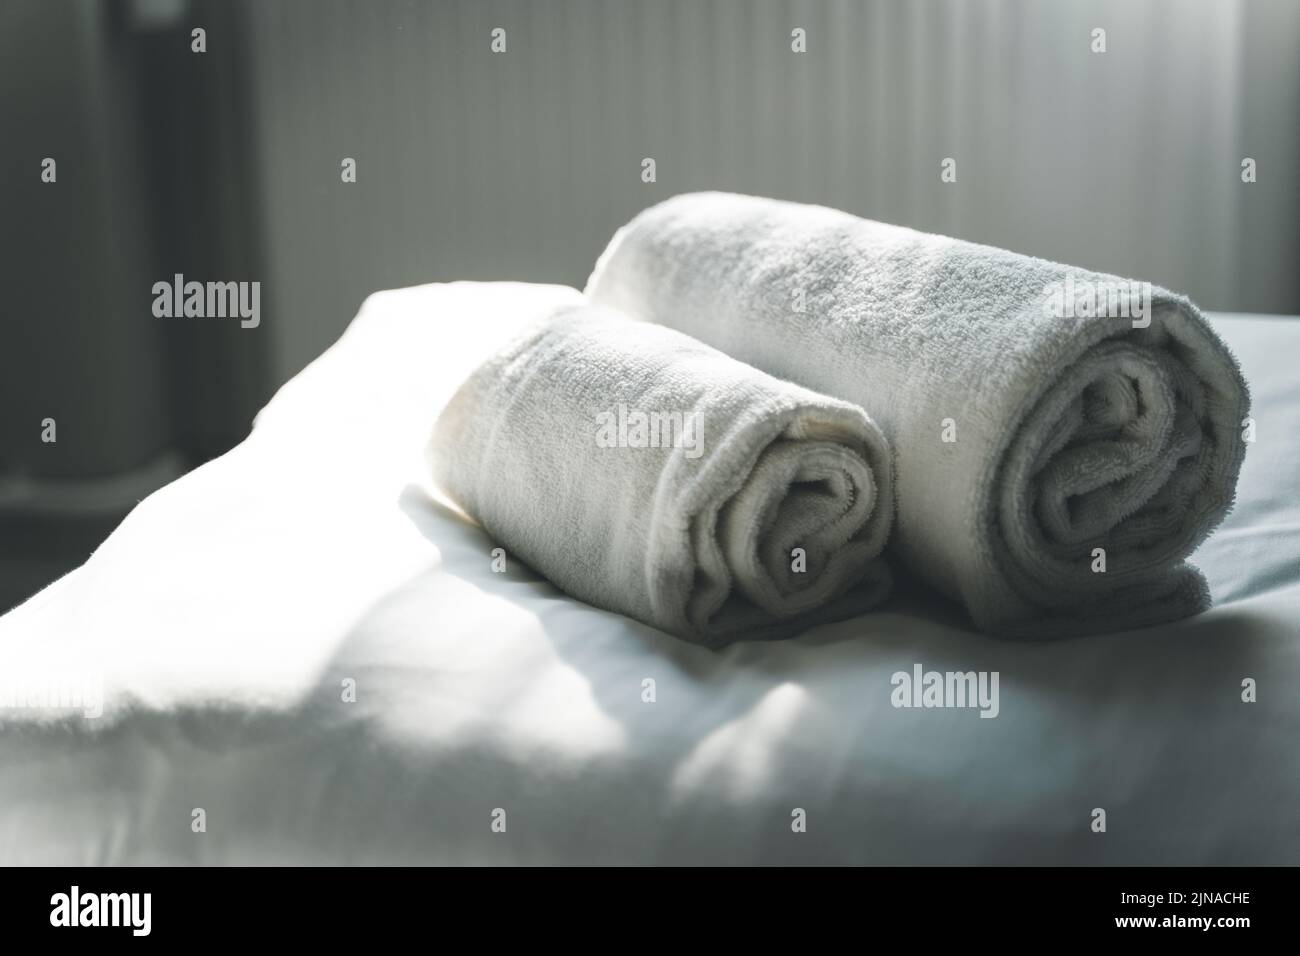 White Rolled Clean Towels On Hotel Bed Stock Photo